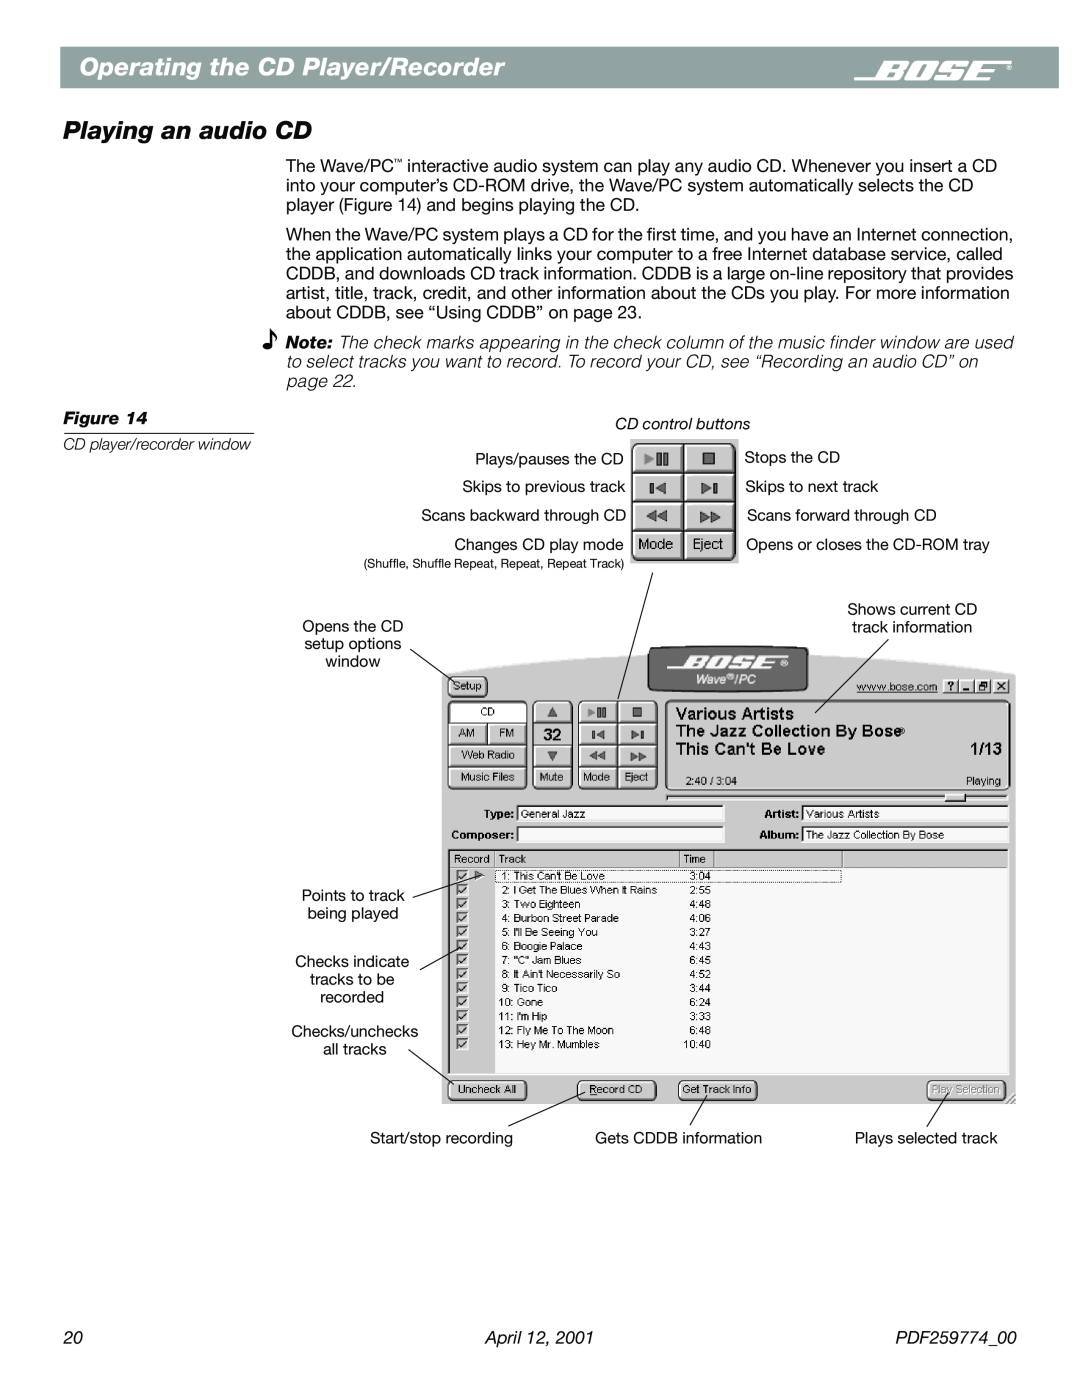 Bose PDF259774_00 manual Operating the CD Player/Recorder, Playing an audio CD 